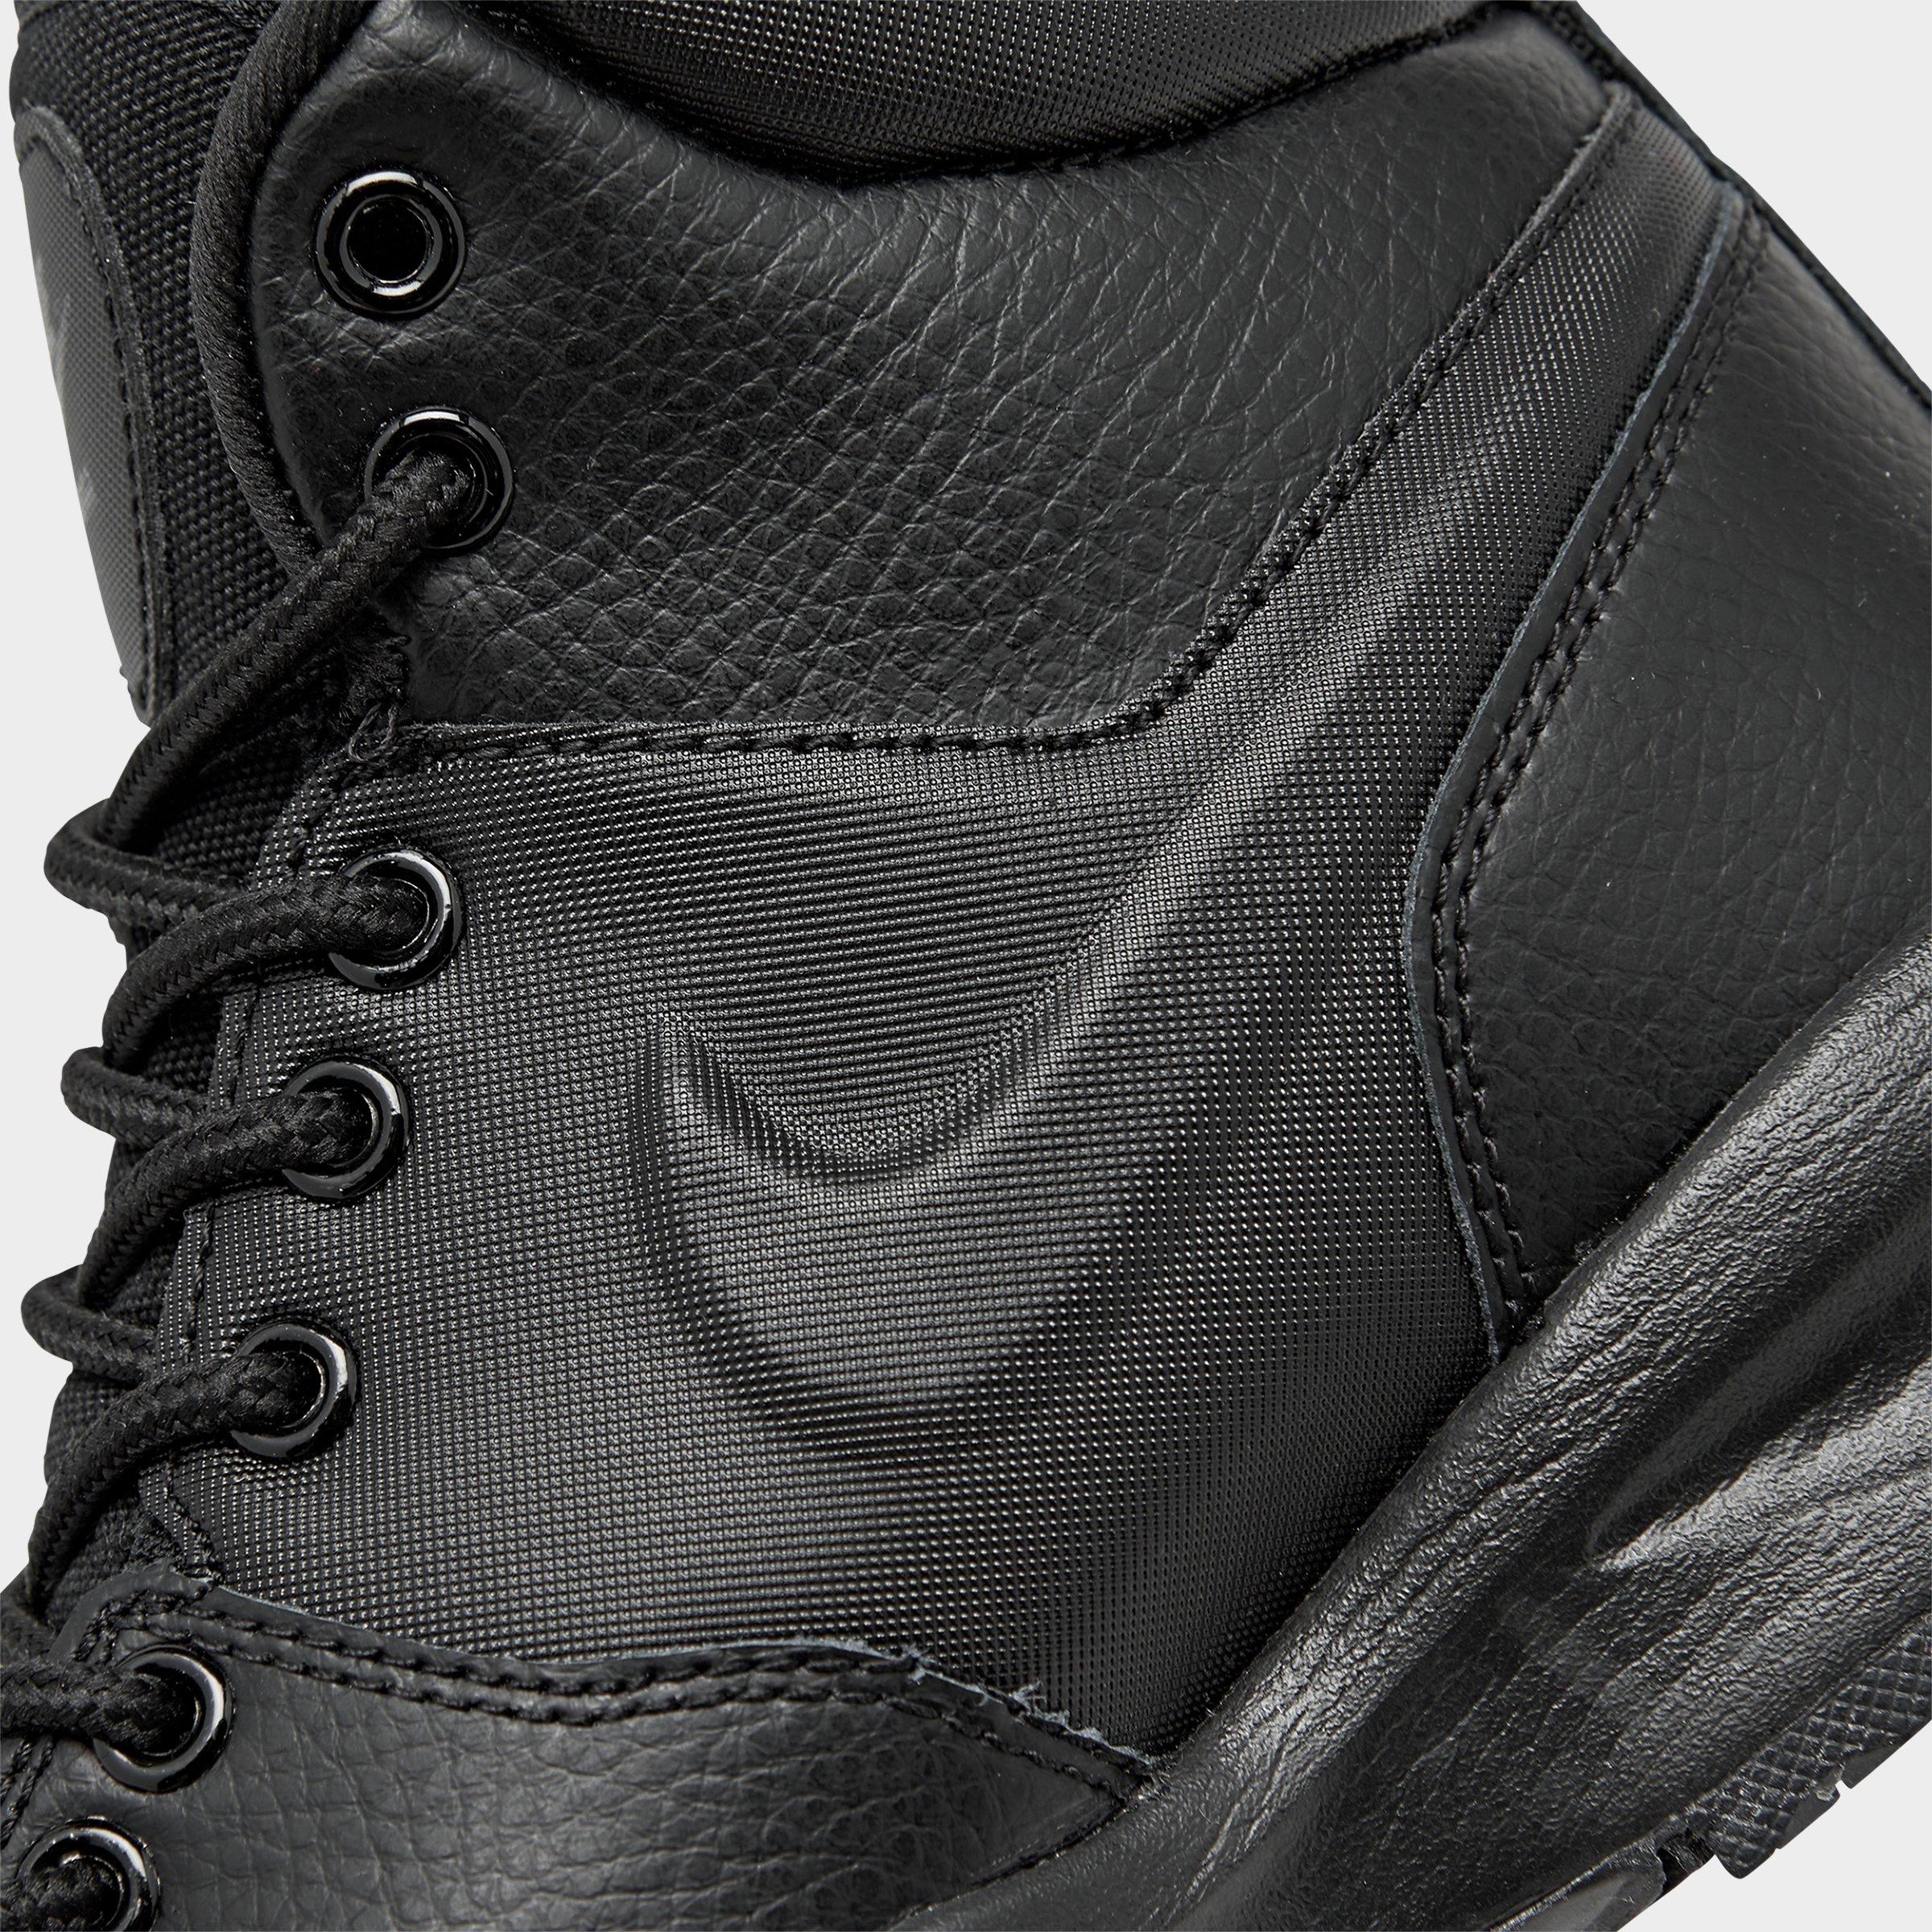 all black nike boots